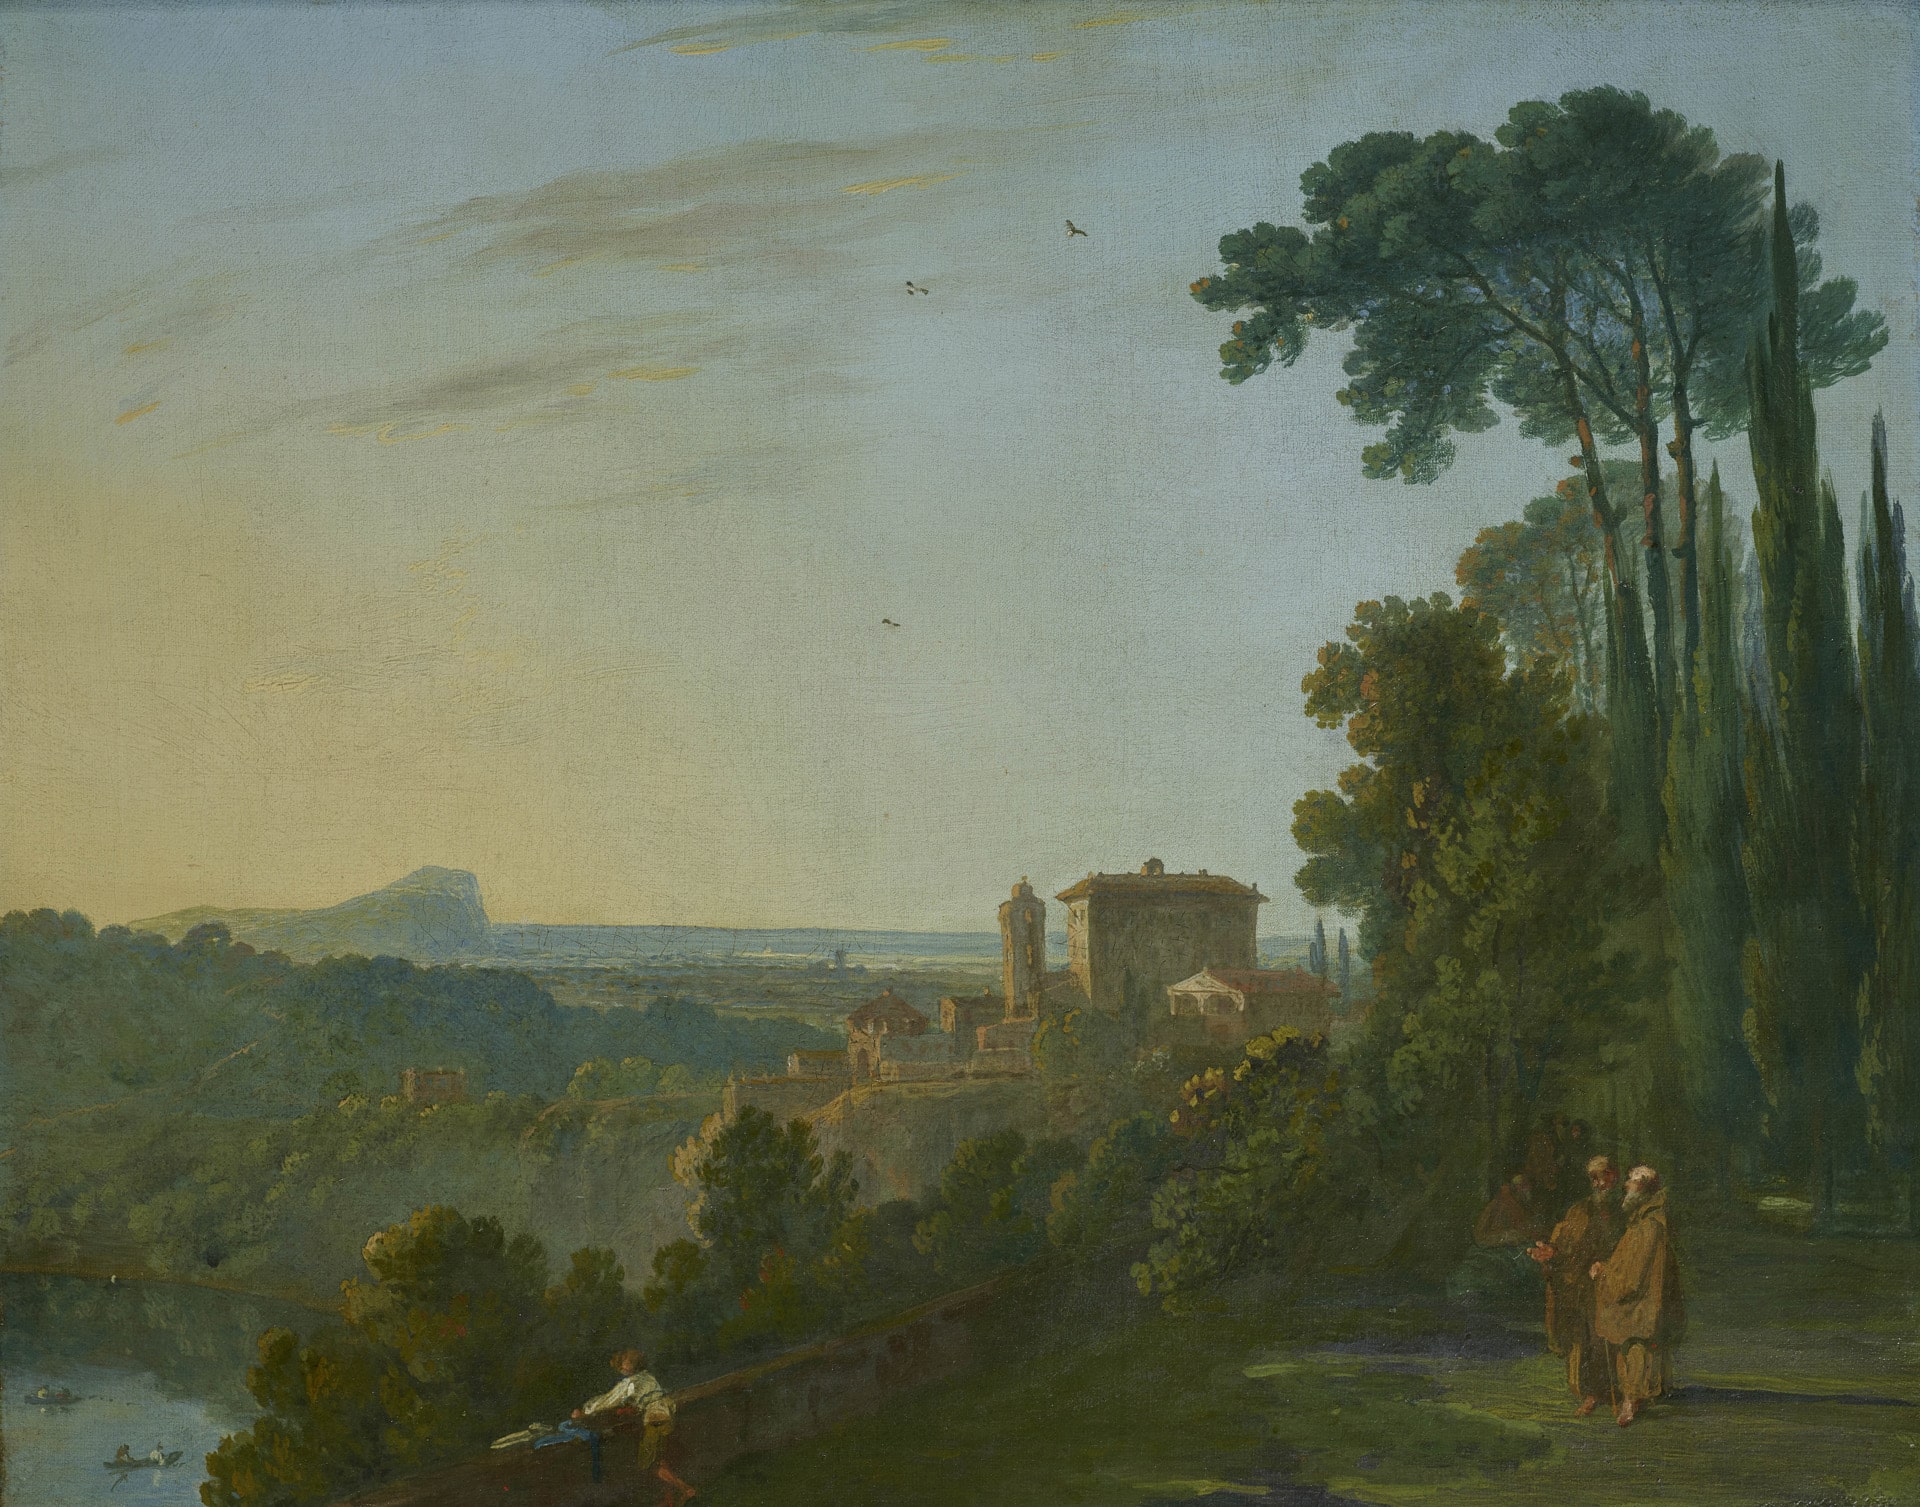 a landscape painting of a lake, wooded area, and villa with two figures talking in the foreground